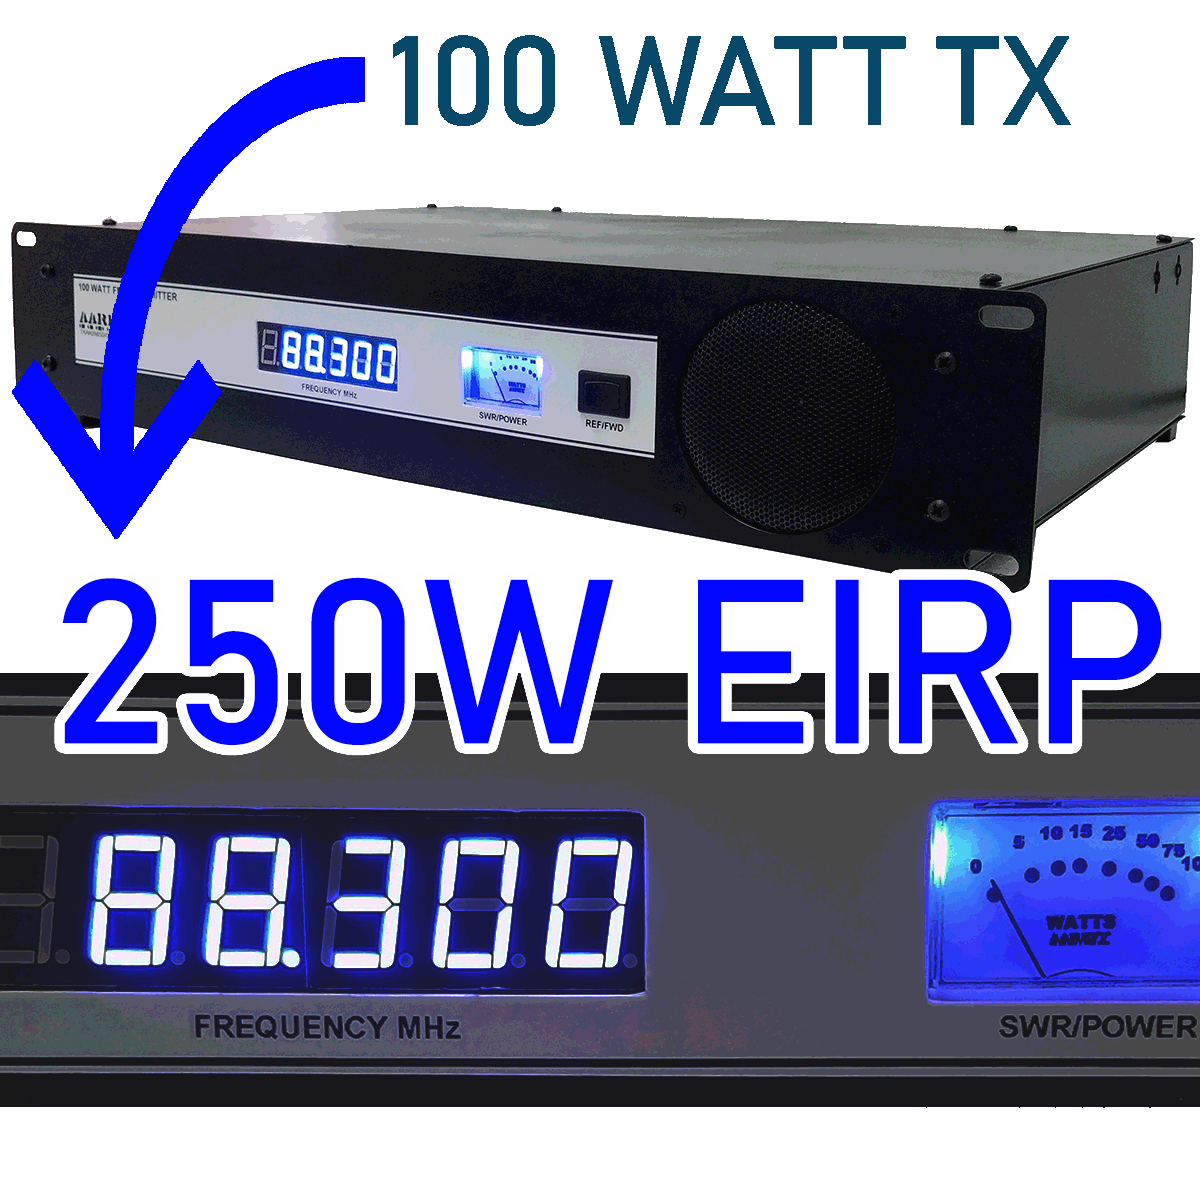 250W EIRP 19 inch professional equipment rack with FM transmitter and RF amplifier